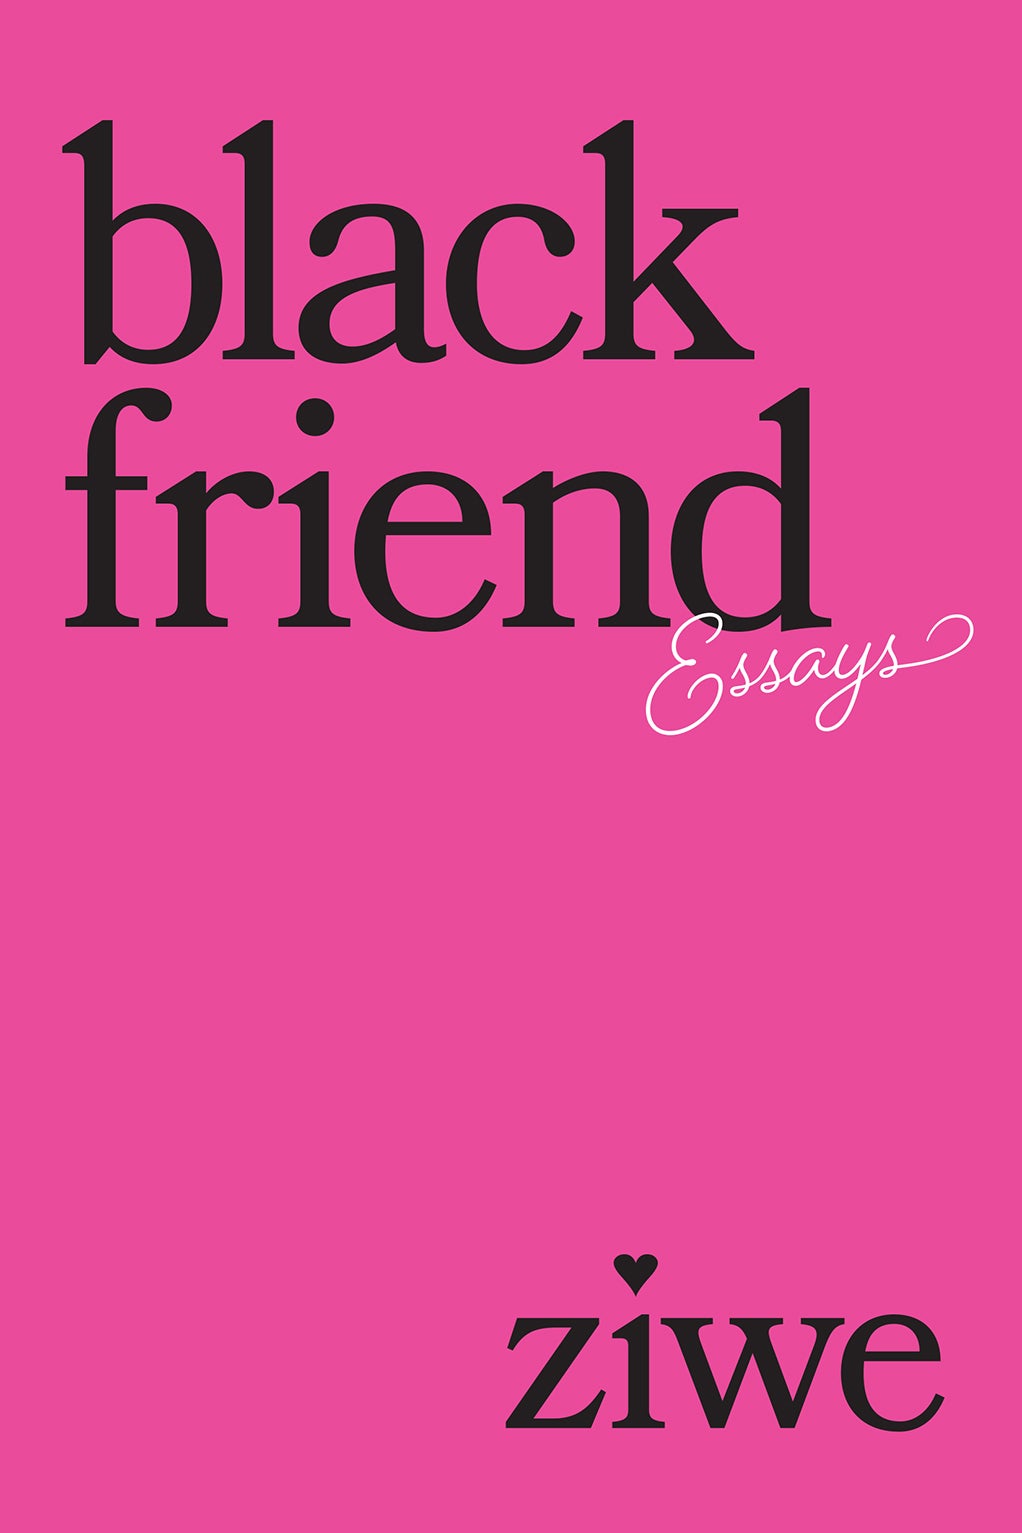 Ziwe Examines Identity With New Book, ‘A Black Friend: Essays’